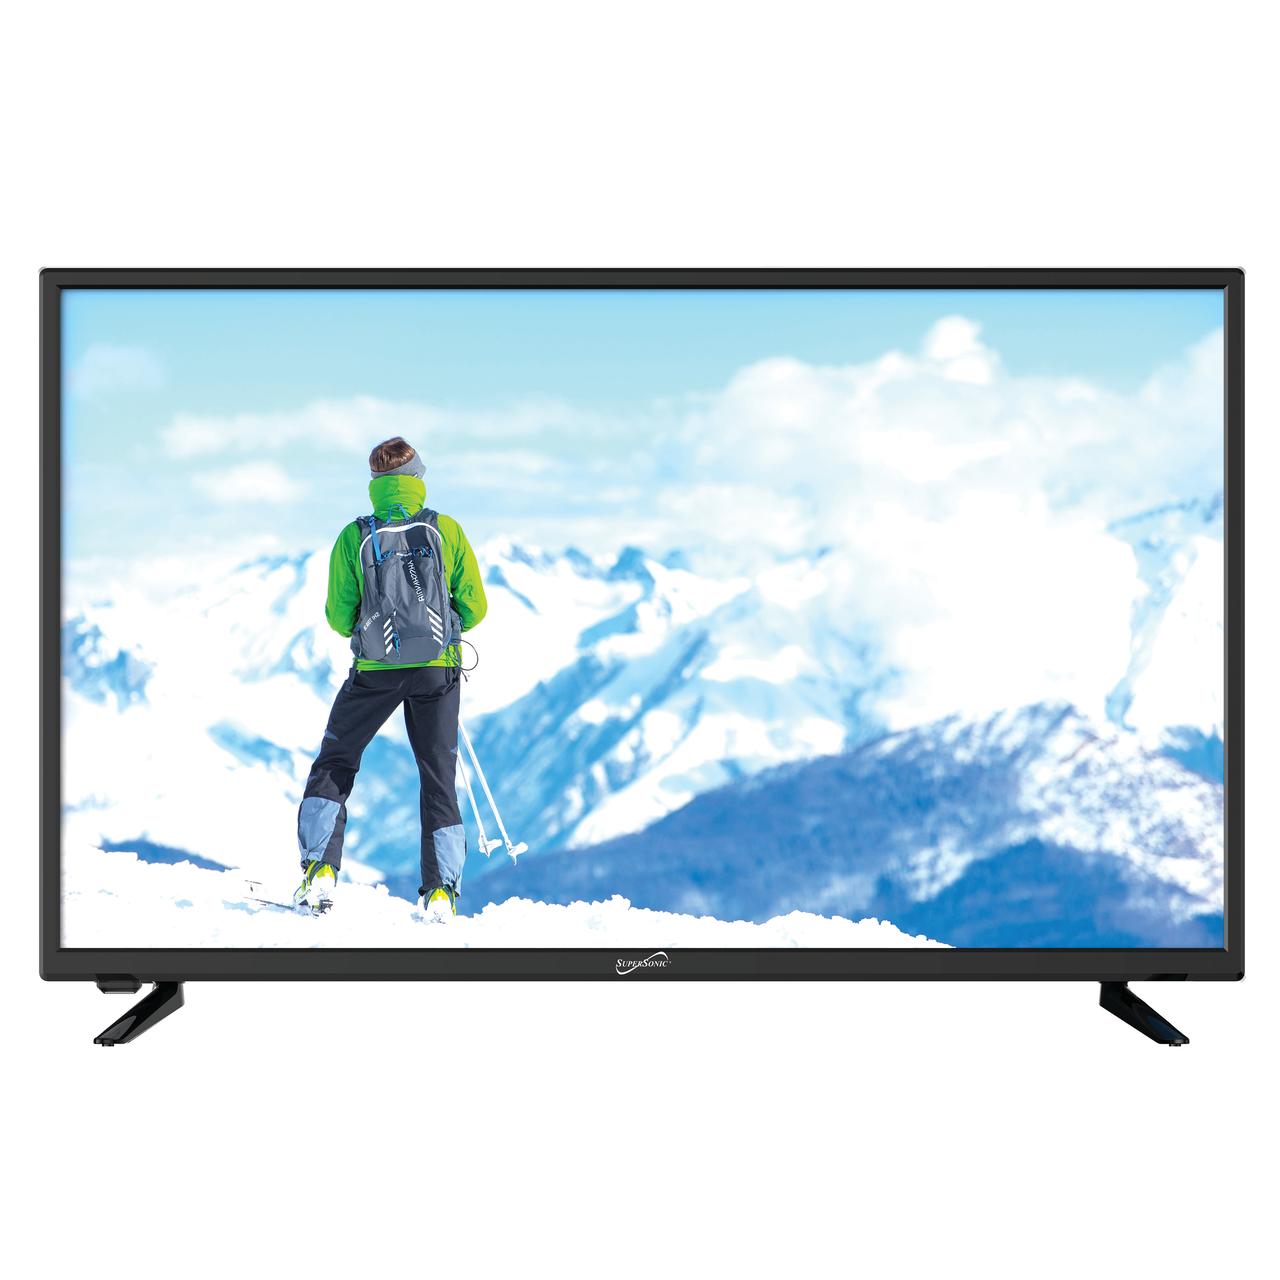 Supersonic 32" Class LED 1366 x 768 Widescreen HDTV - image 1 of 4